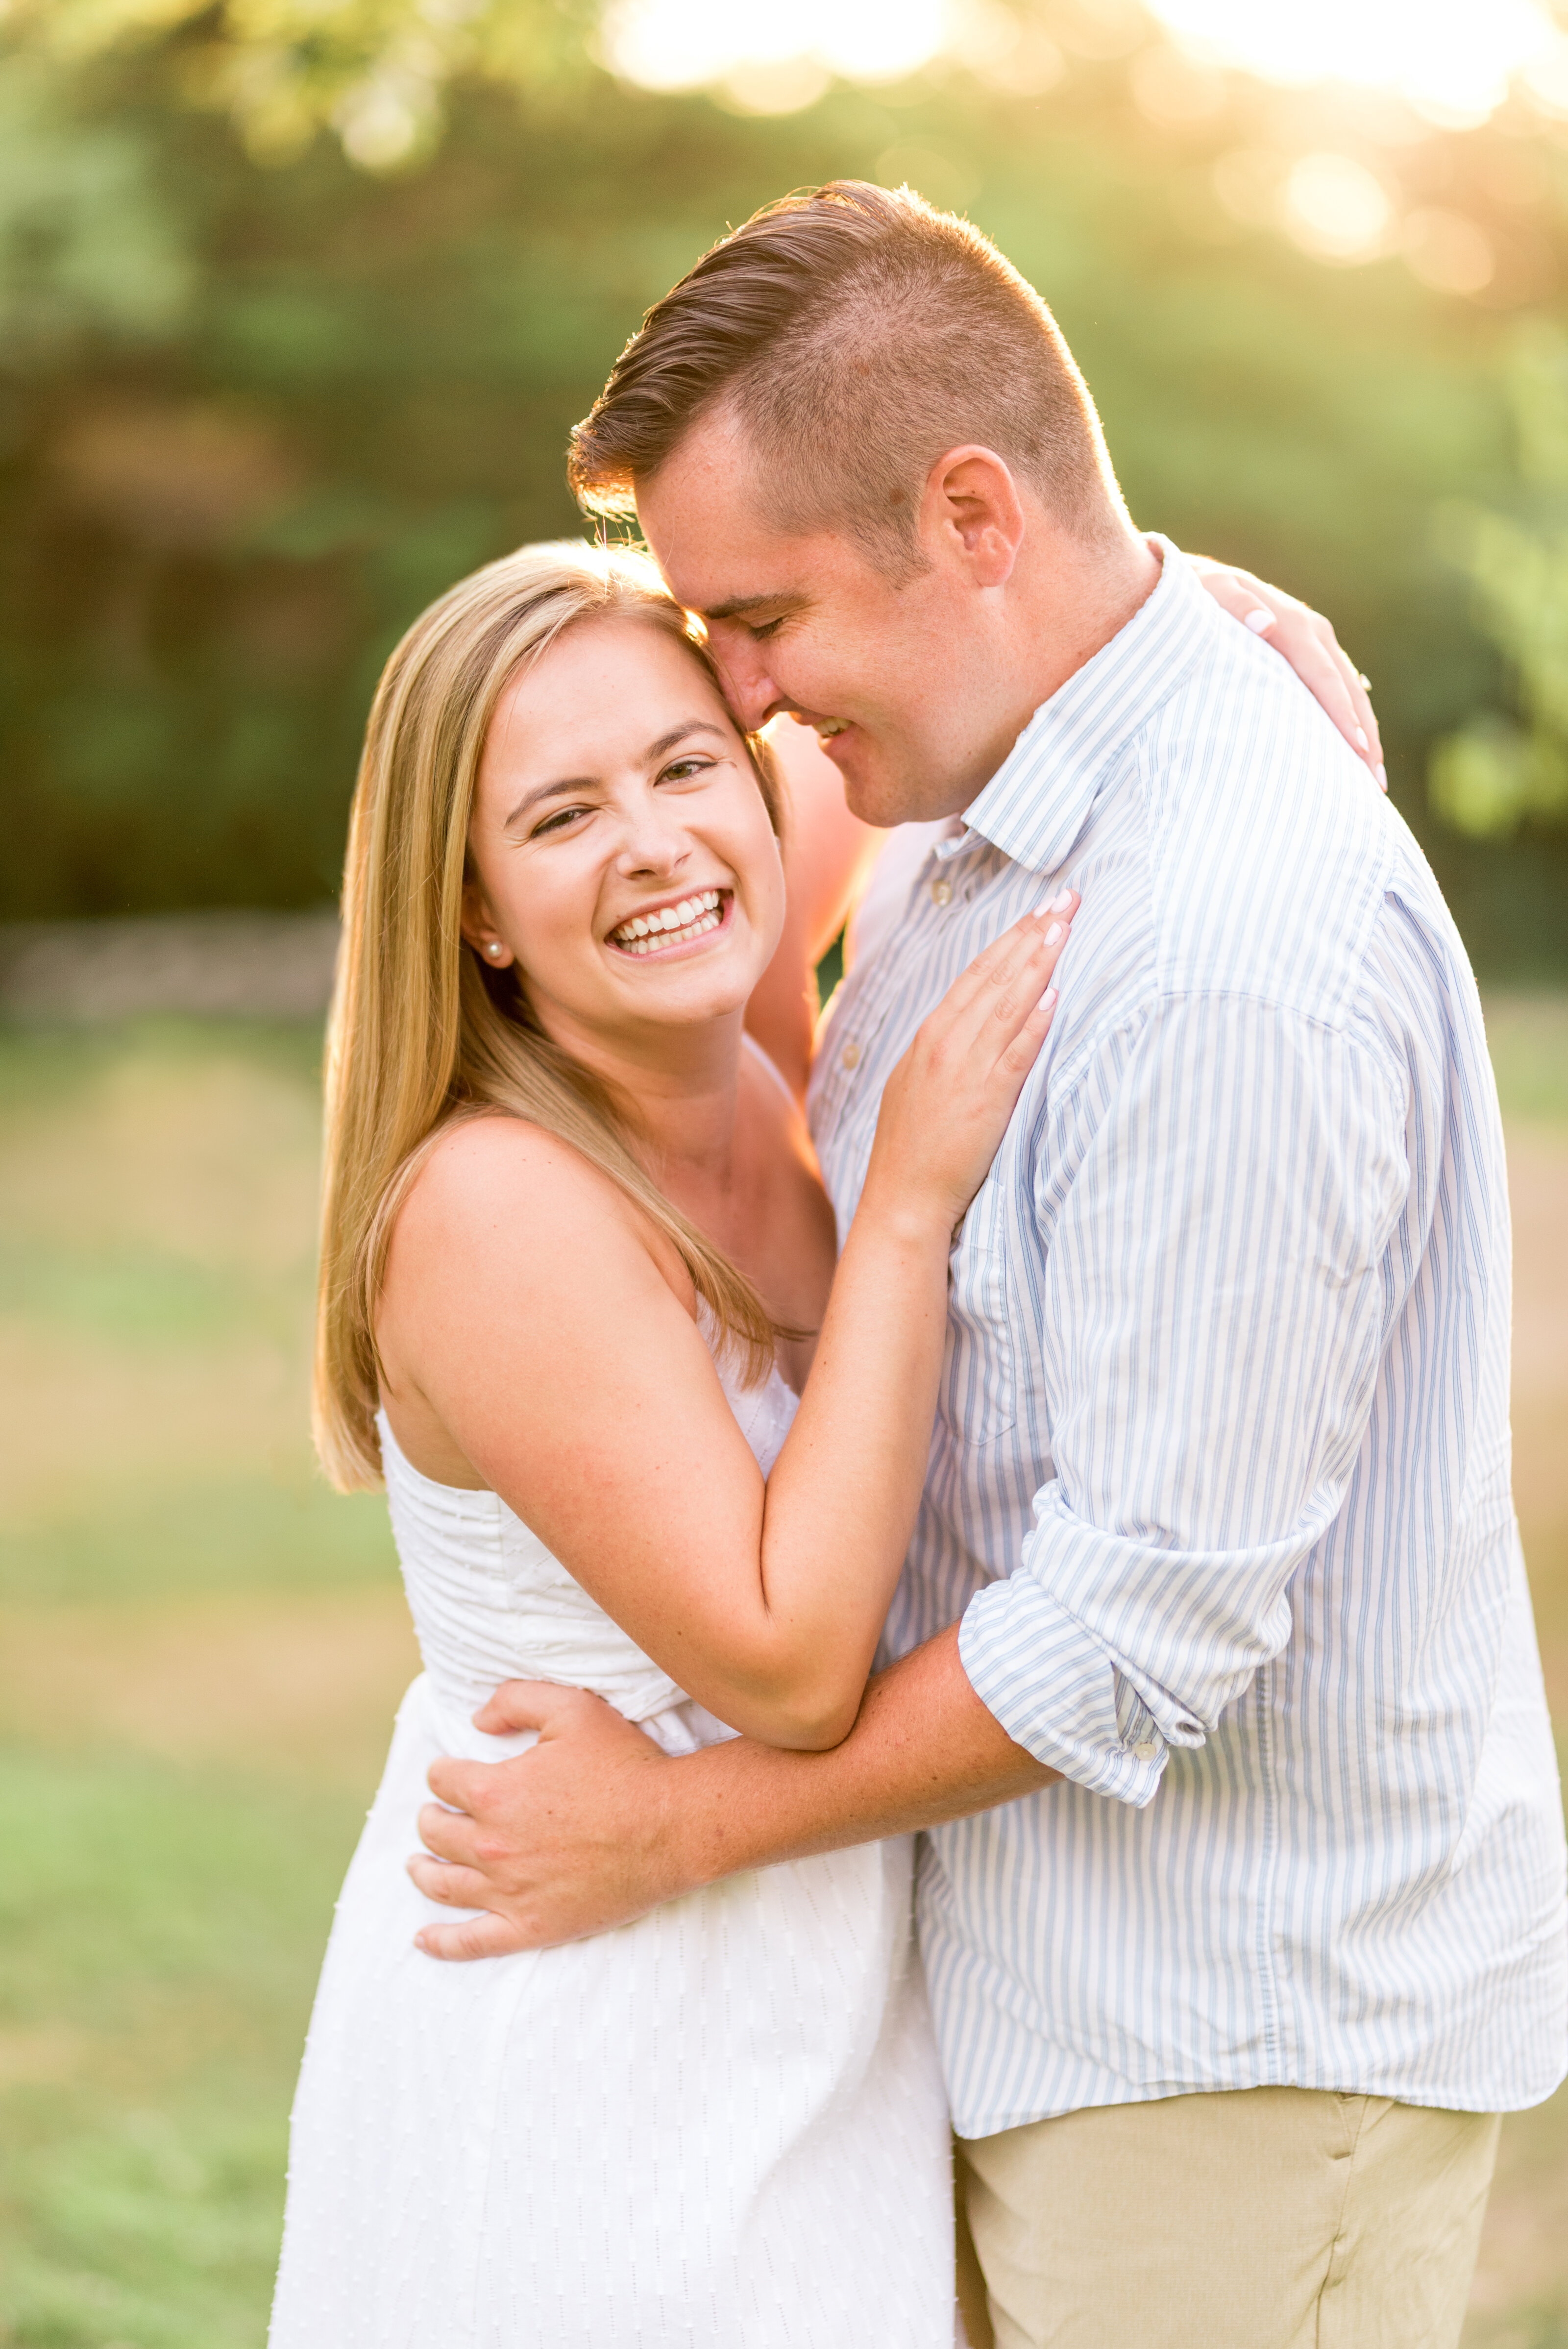 Giggly Engagement Couple